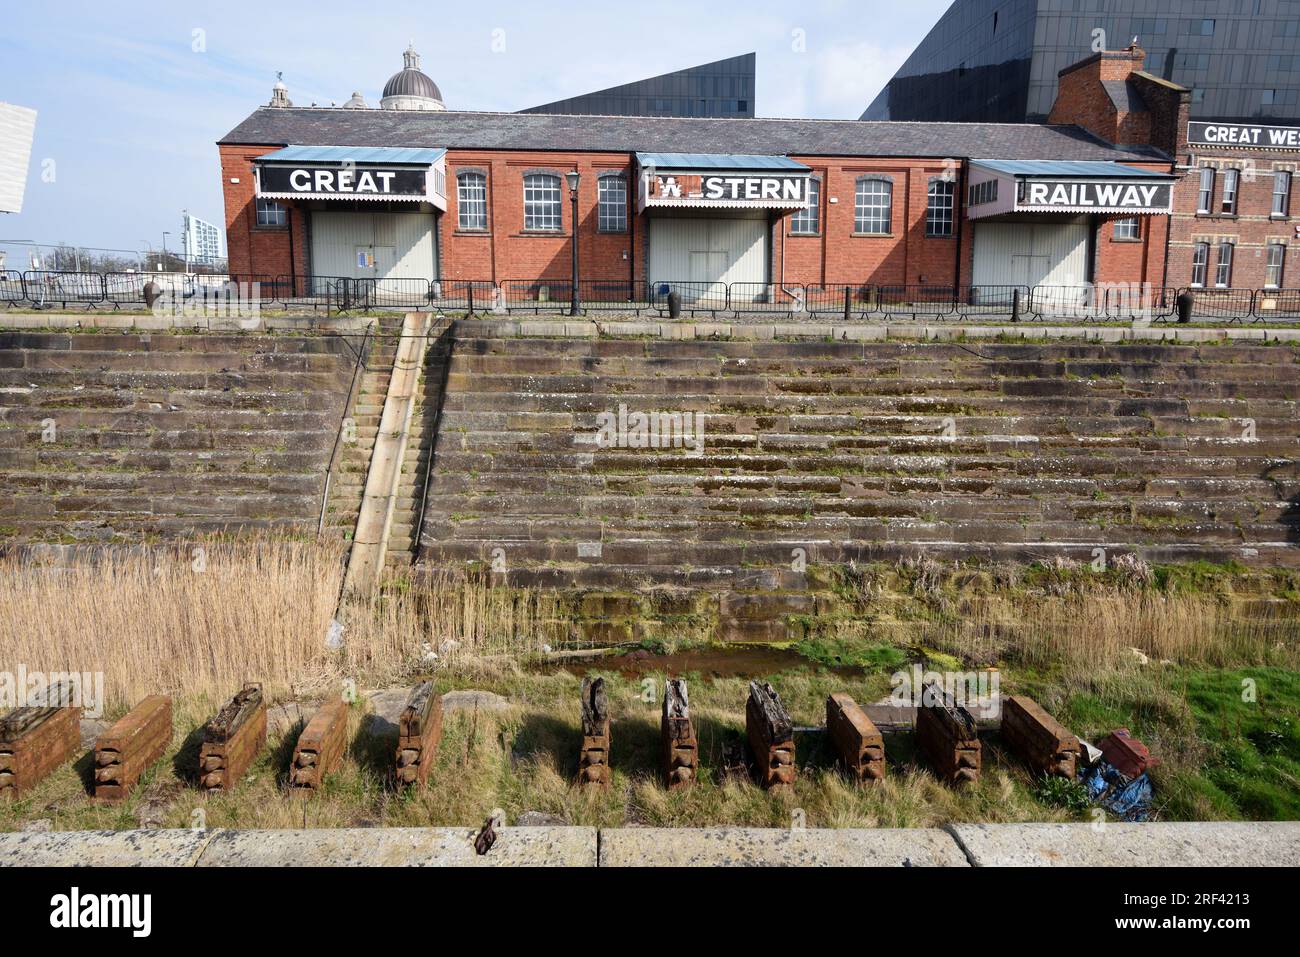 Canning Graving Docks (1765) o Dry Dock sul lungomare o Pier Head Liverpool & Great Western Railway Building Foto Stock